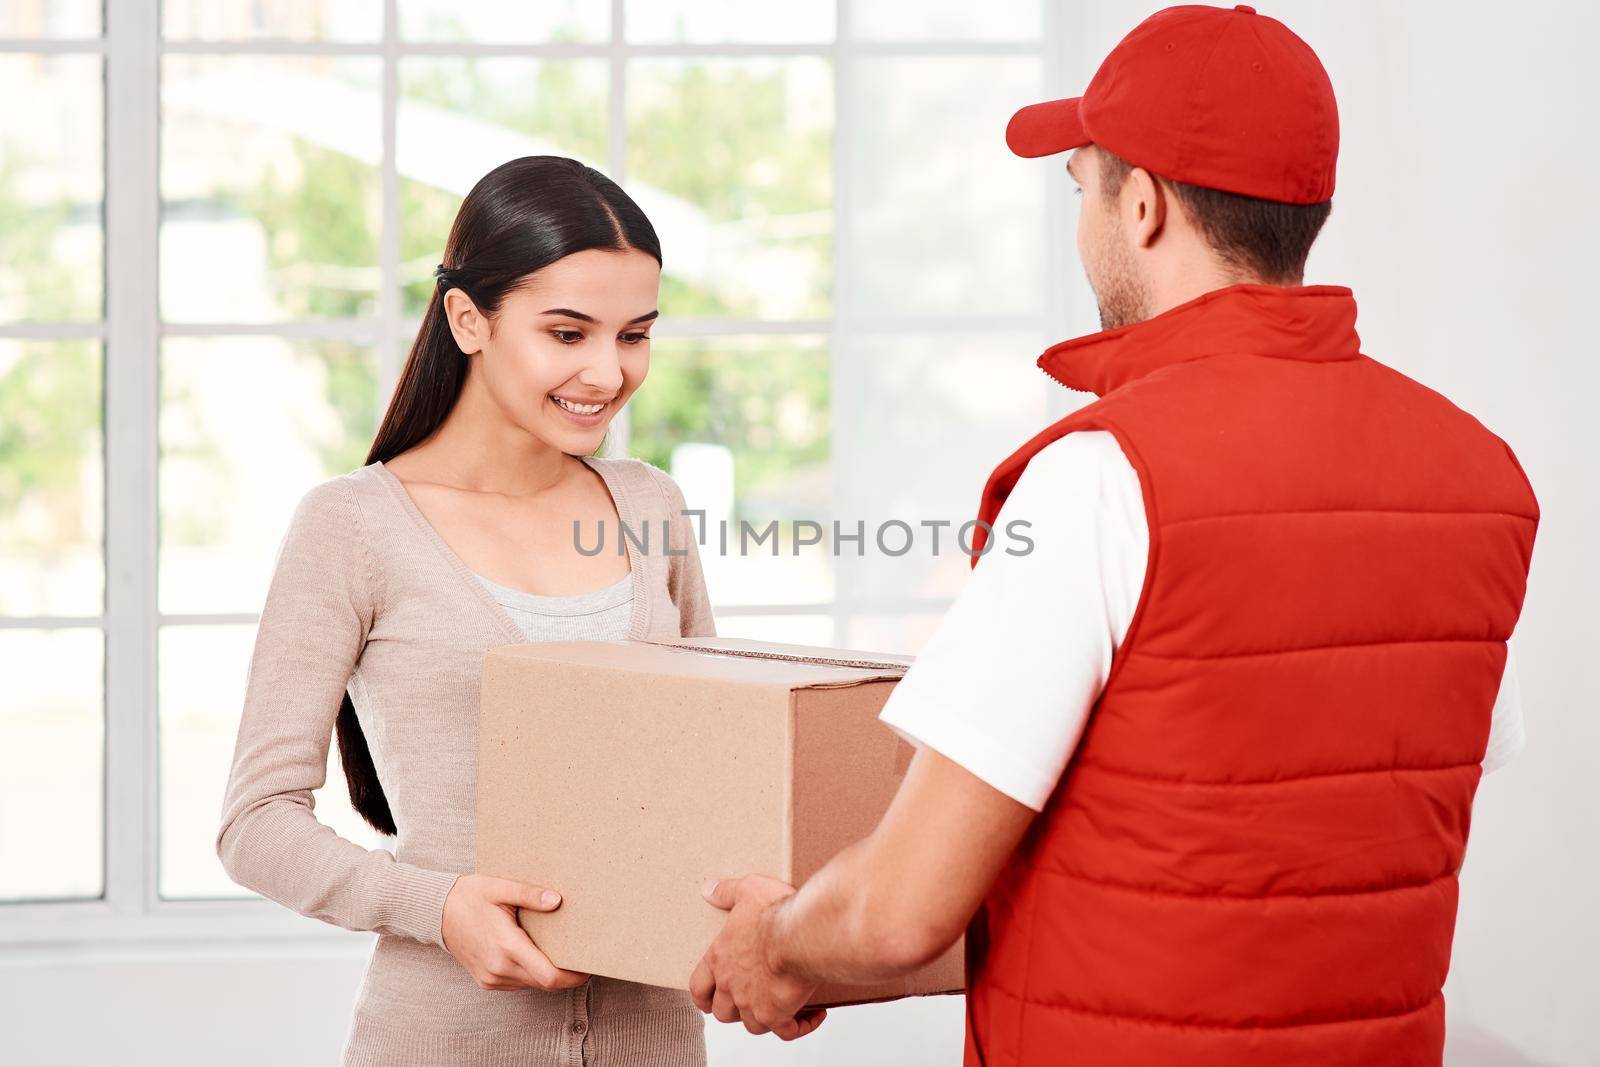 Treat Your Customers Right. Young woman receiving parcel from delivery man by friendsstock